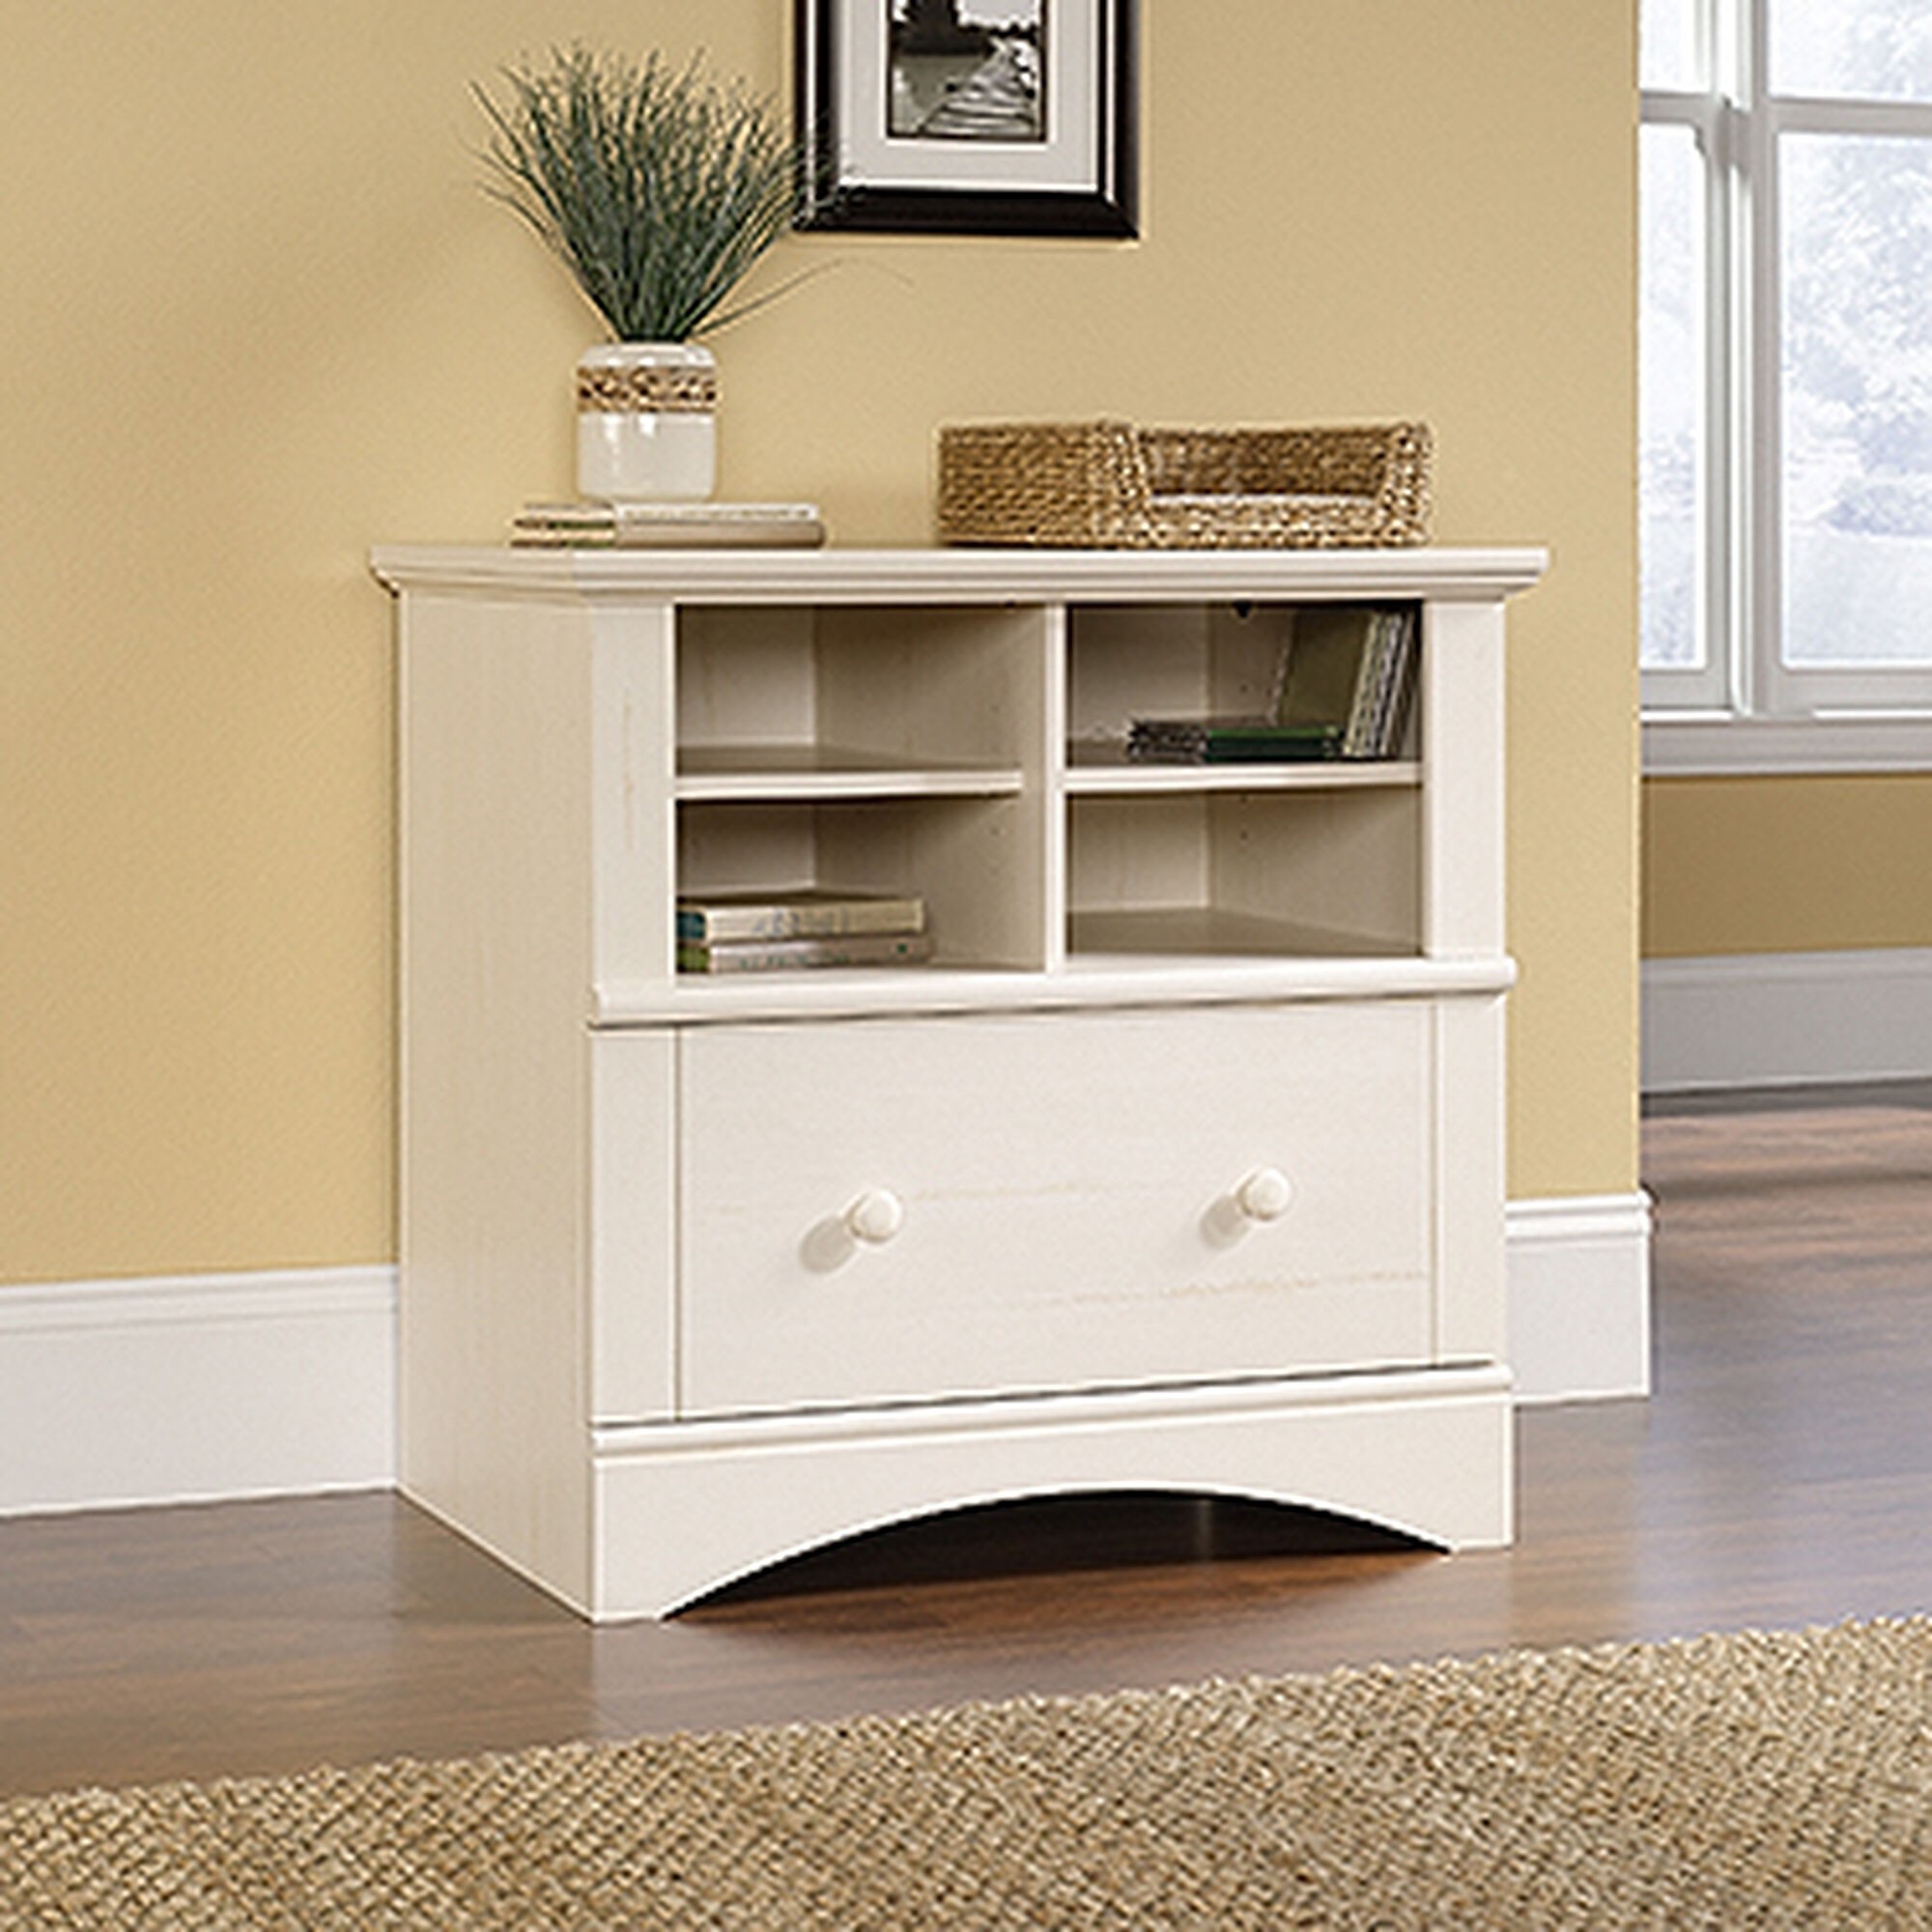 Sauder file cabinet harbor view collection 1